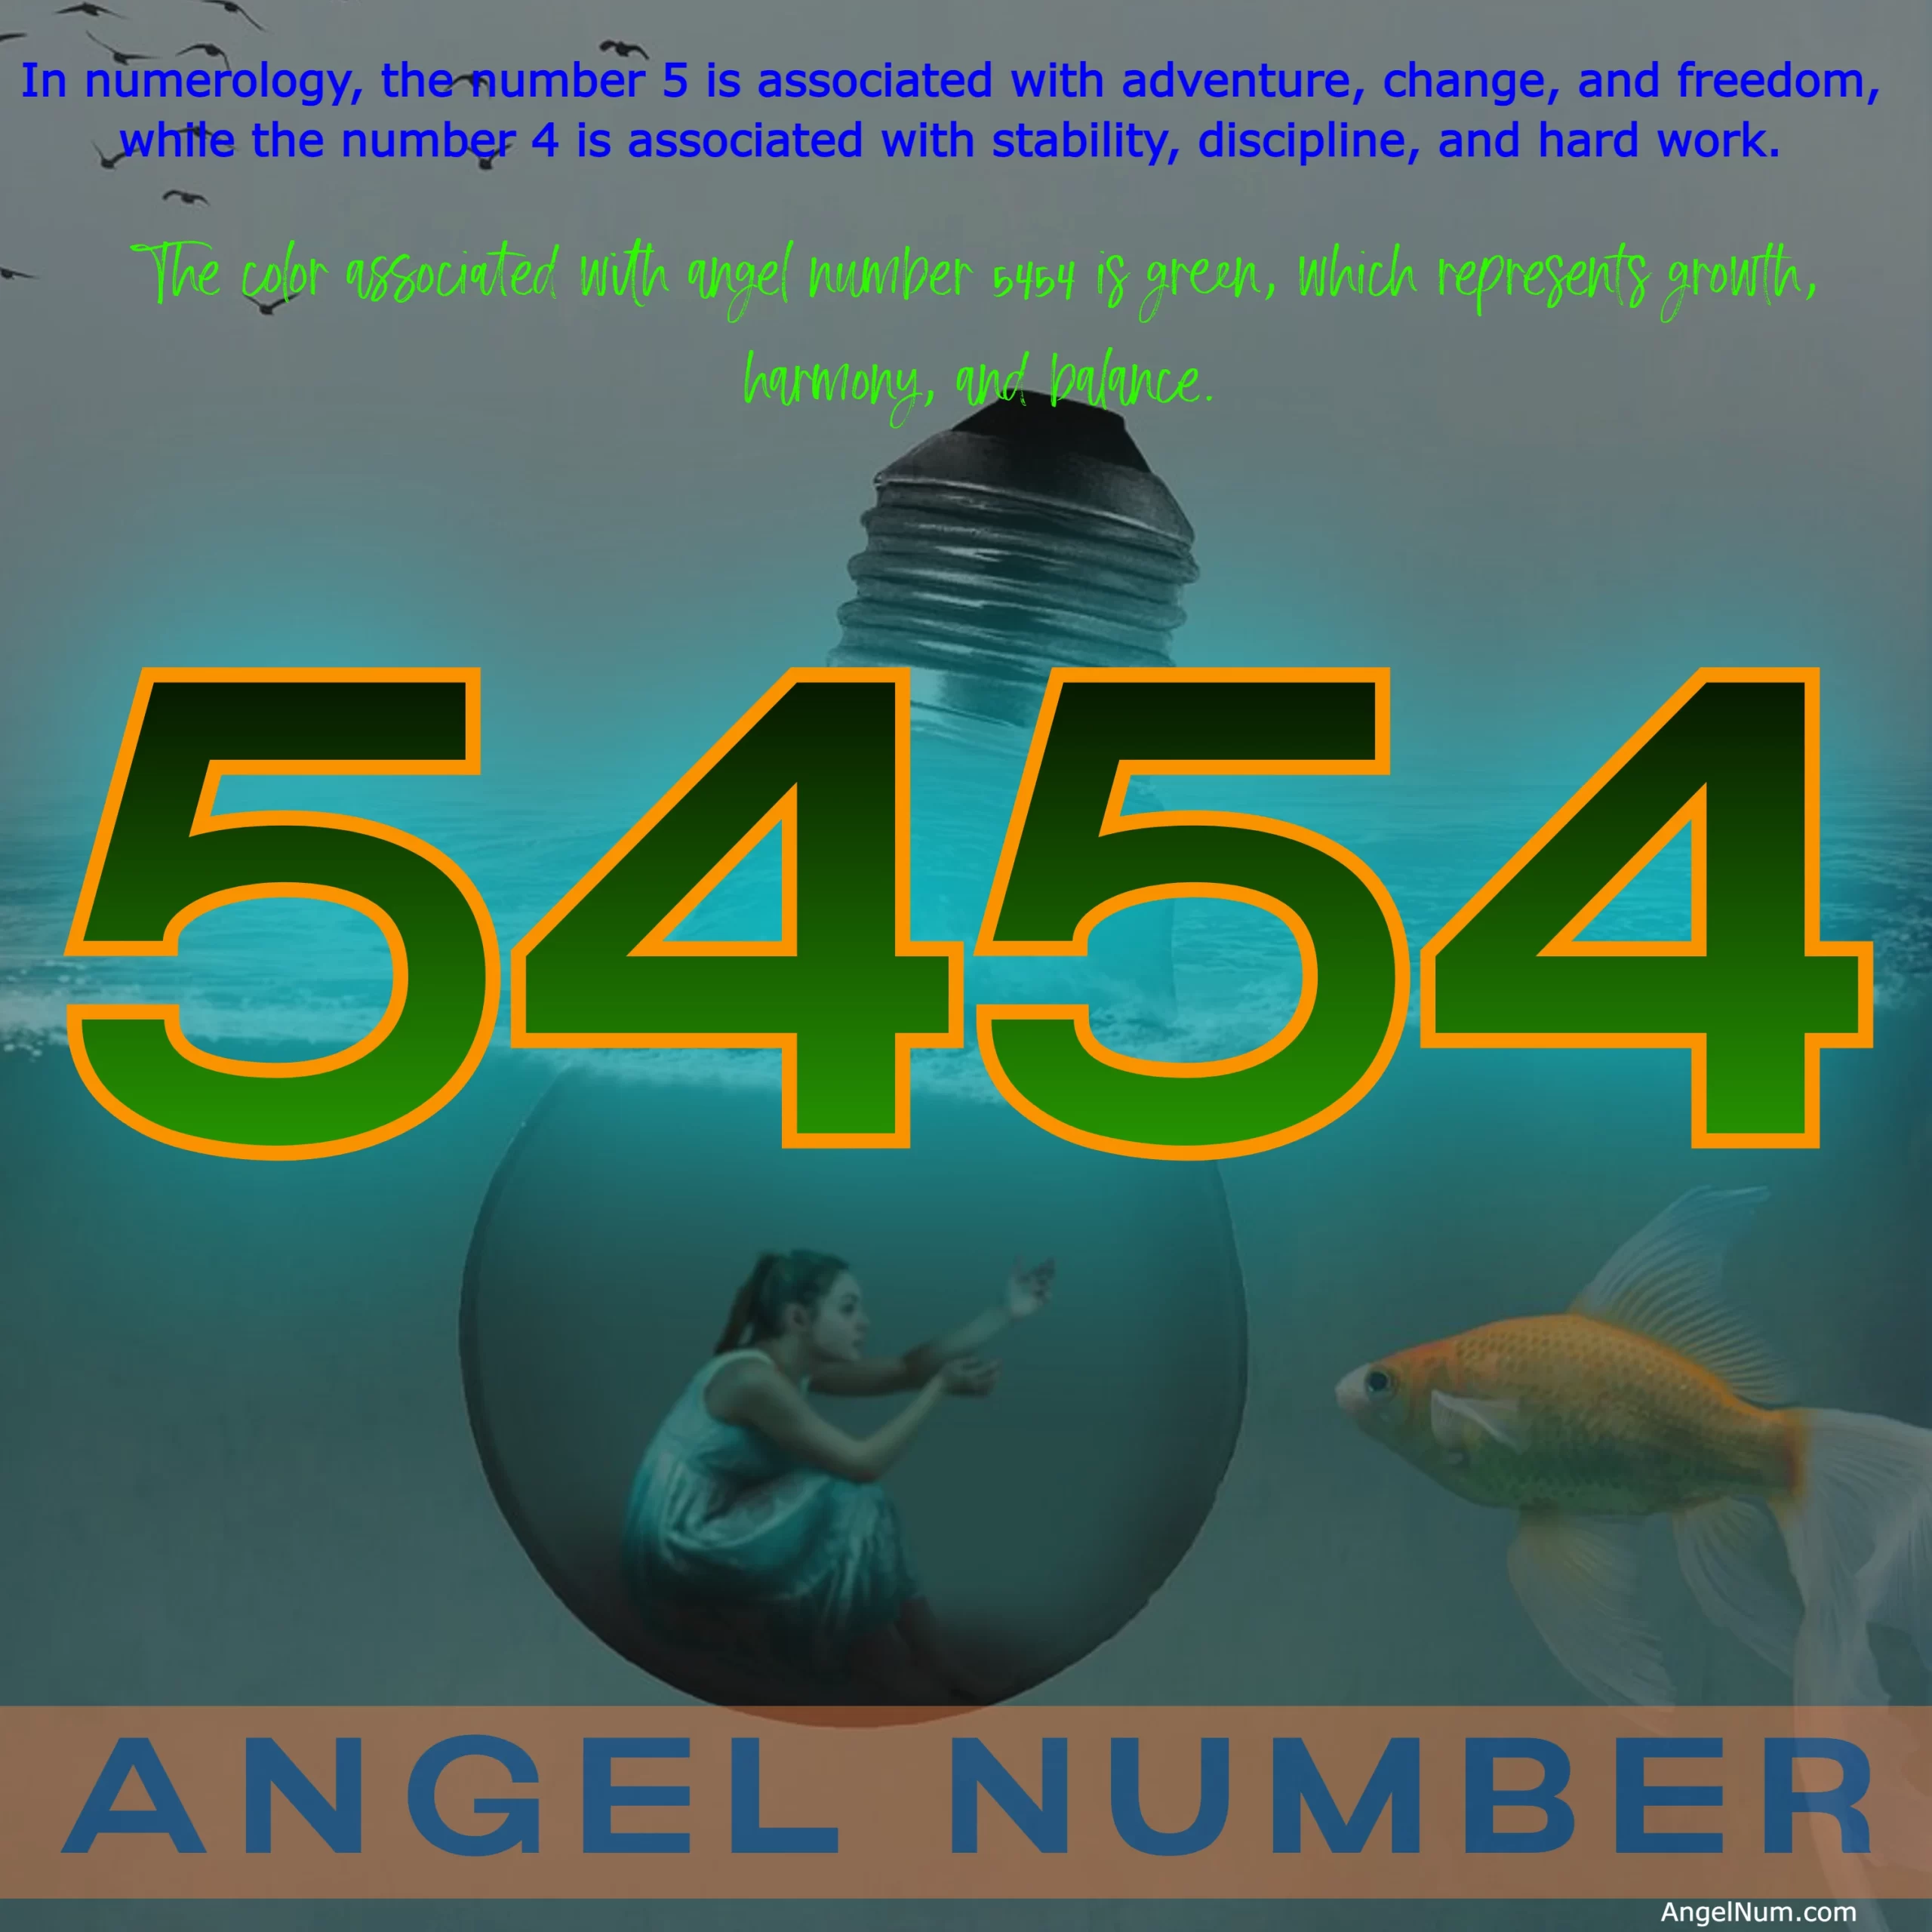 Discovering the Meanings and Symbolism of Angel Number 5454